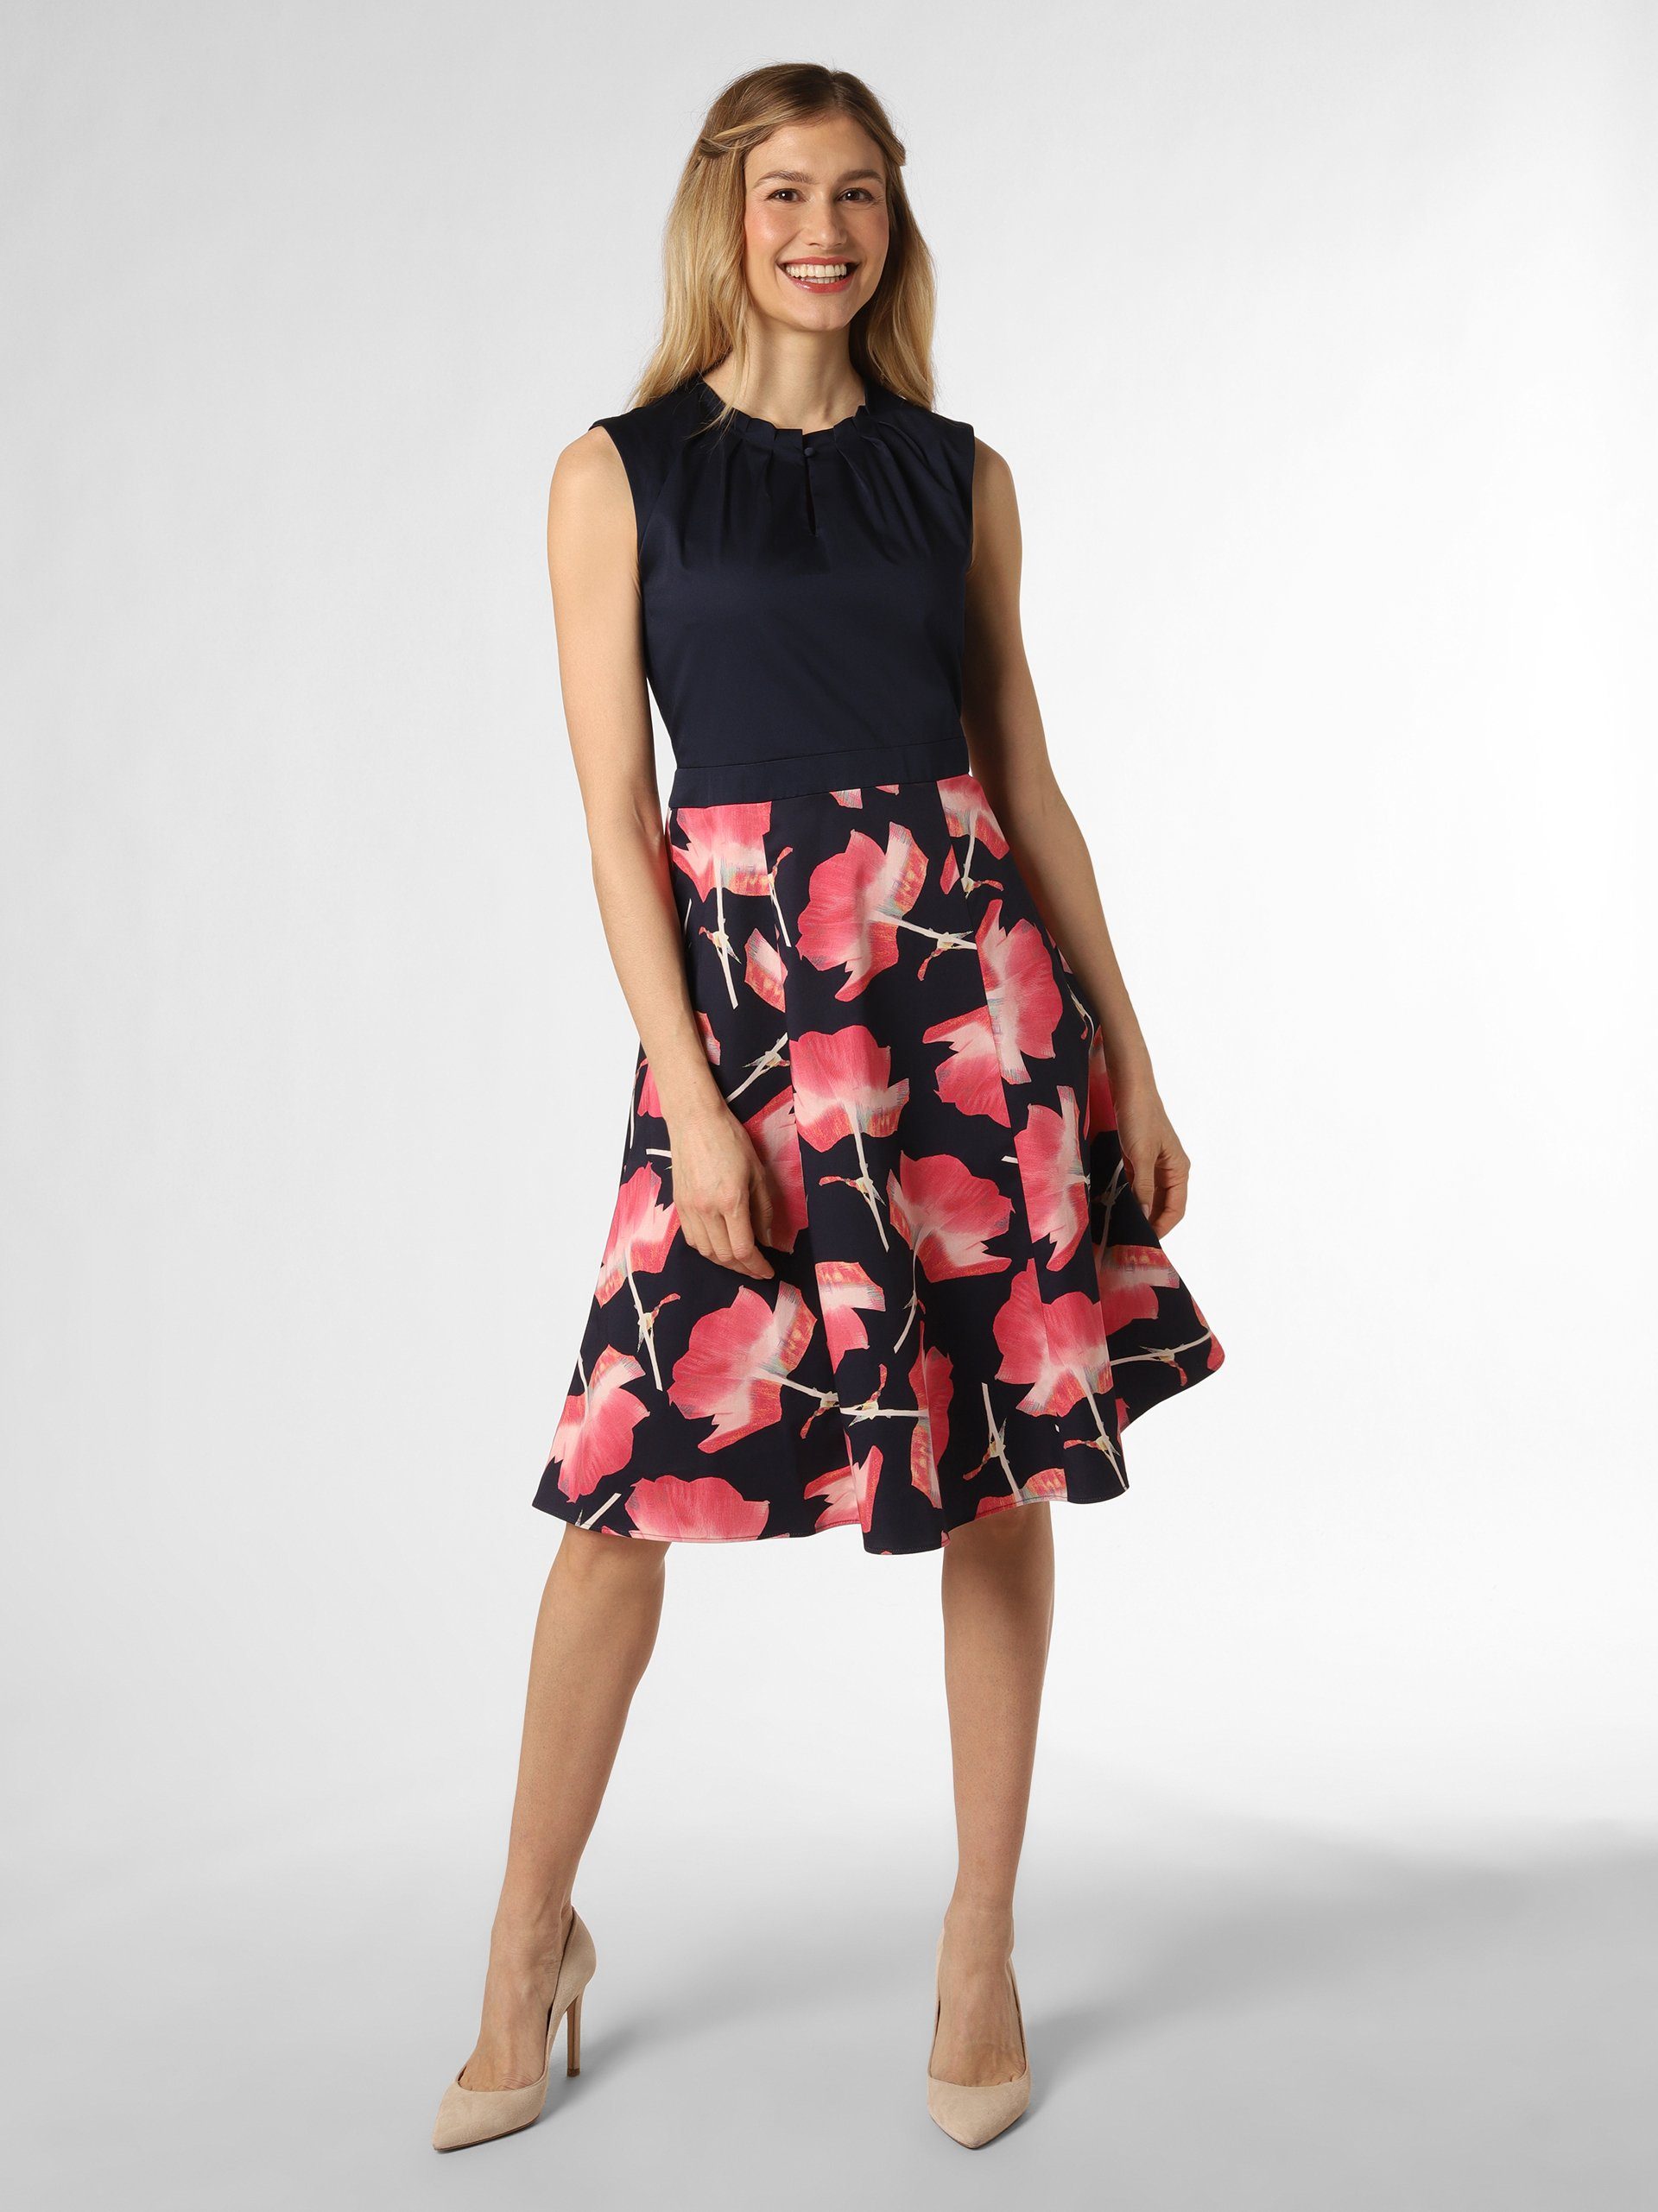 marine Betty Barclay Betty&Co A-Linien-Kleid pink